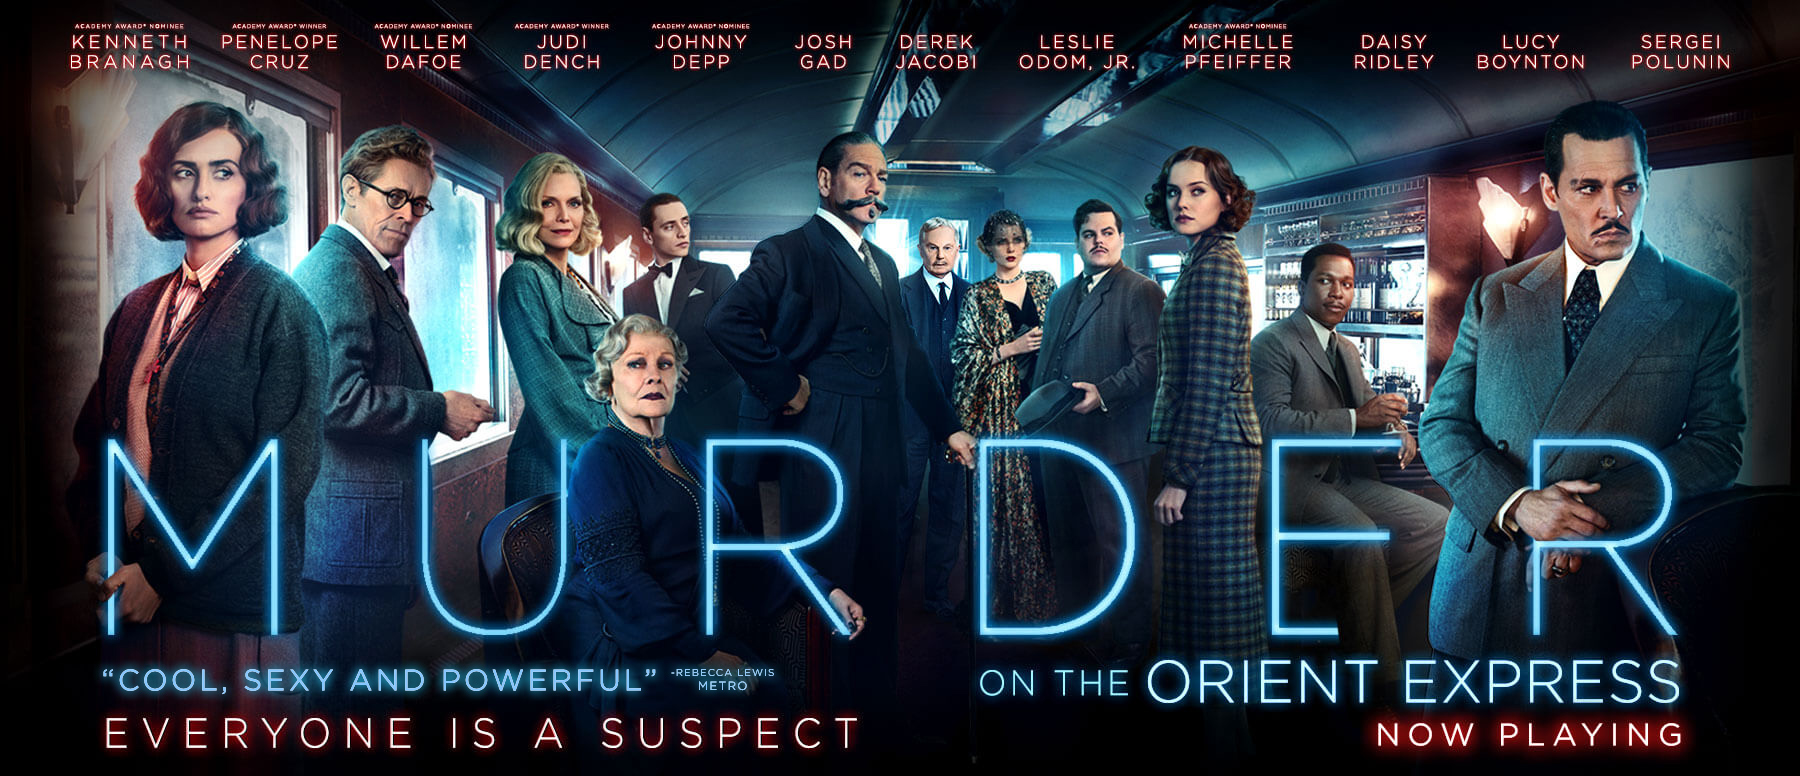 ‘Murder on the Orient Express:’ all style, no substance